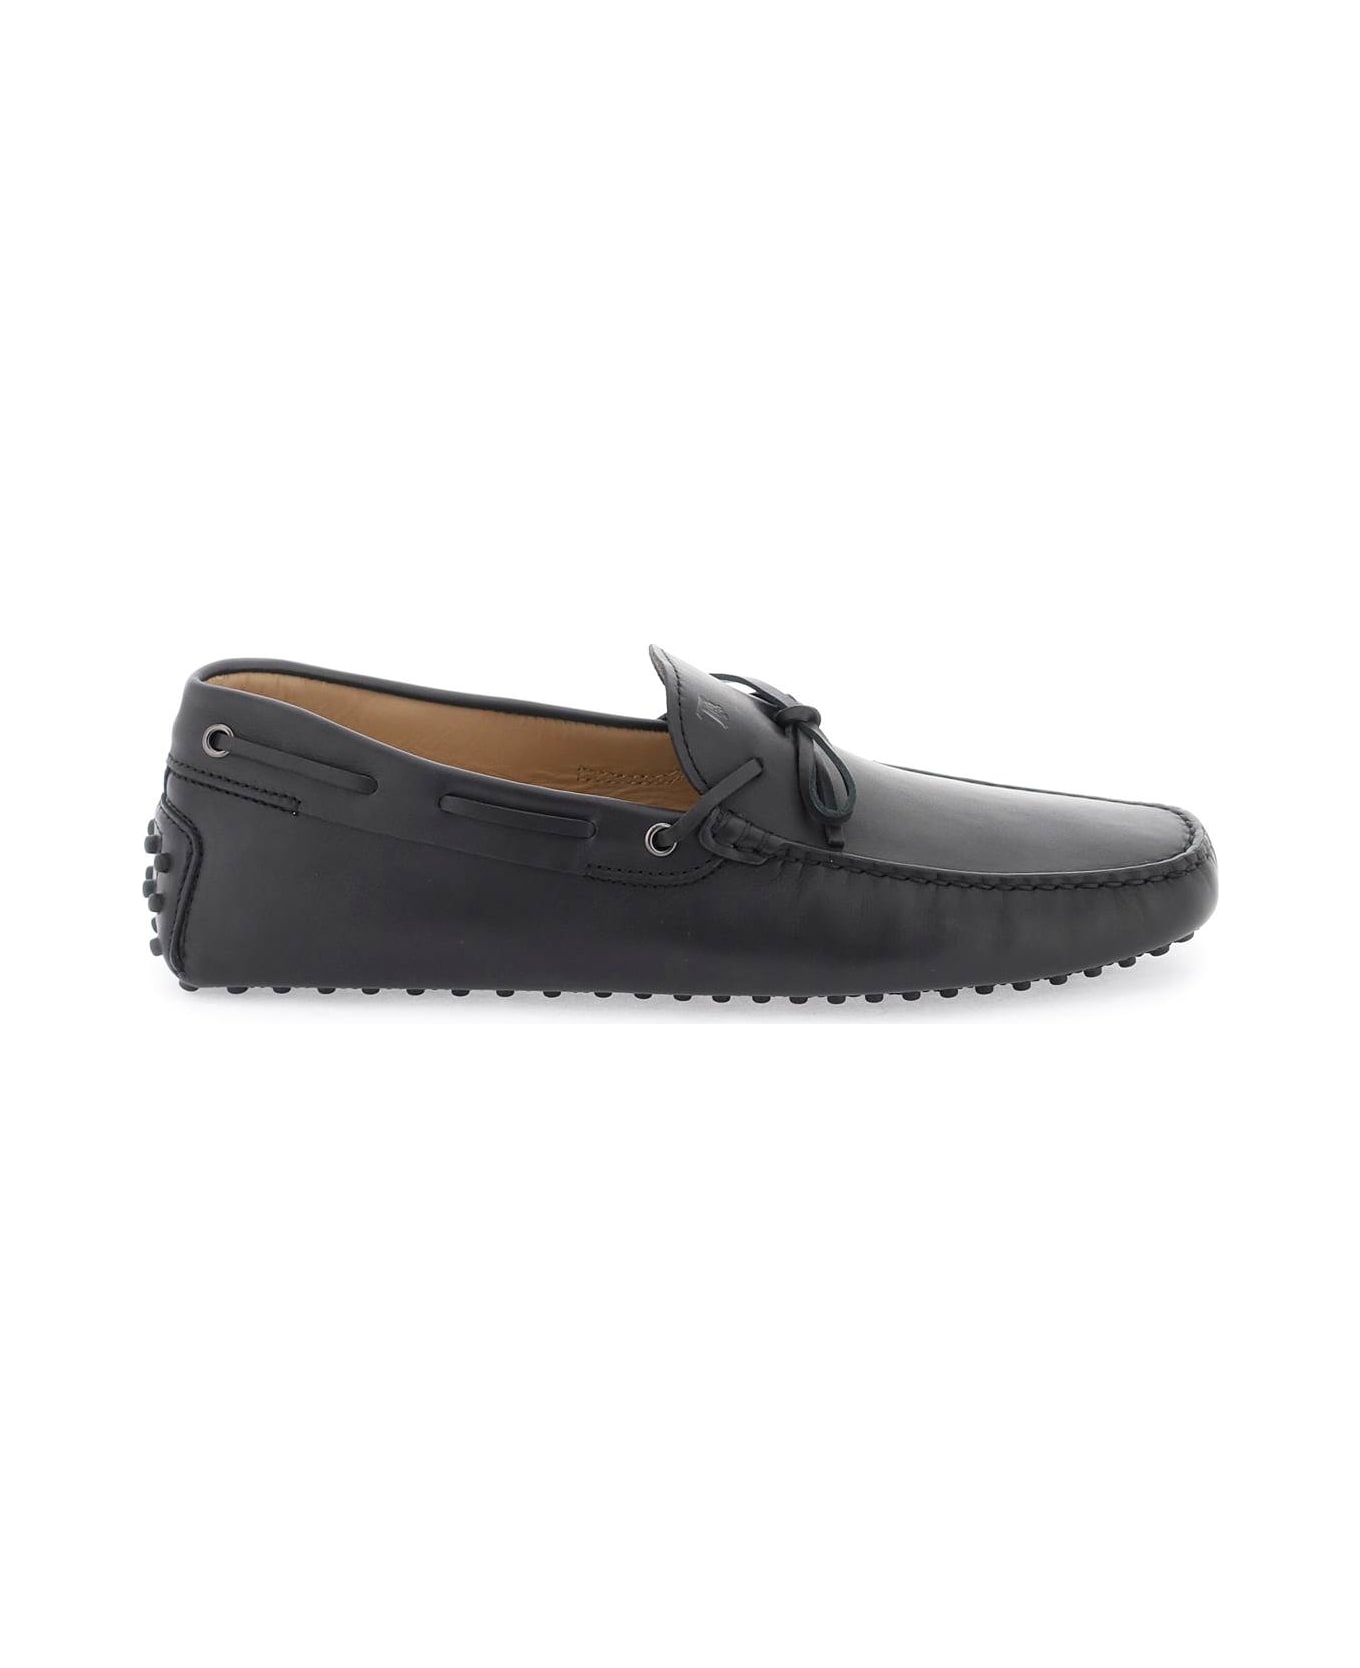 Tod's Gommino Slip-on Driving Loafers - NERO (Black)